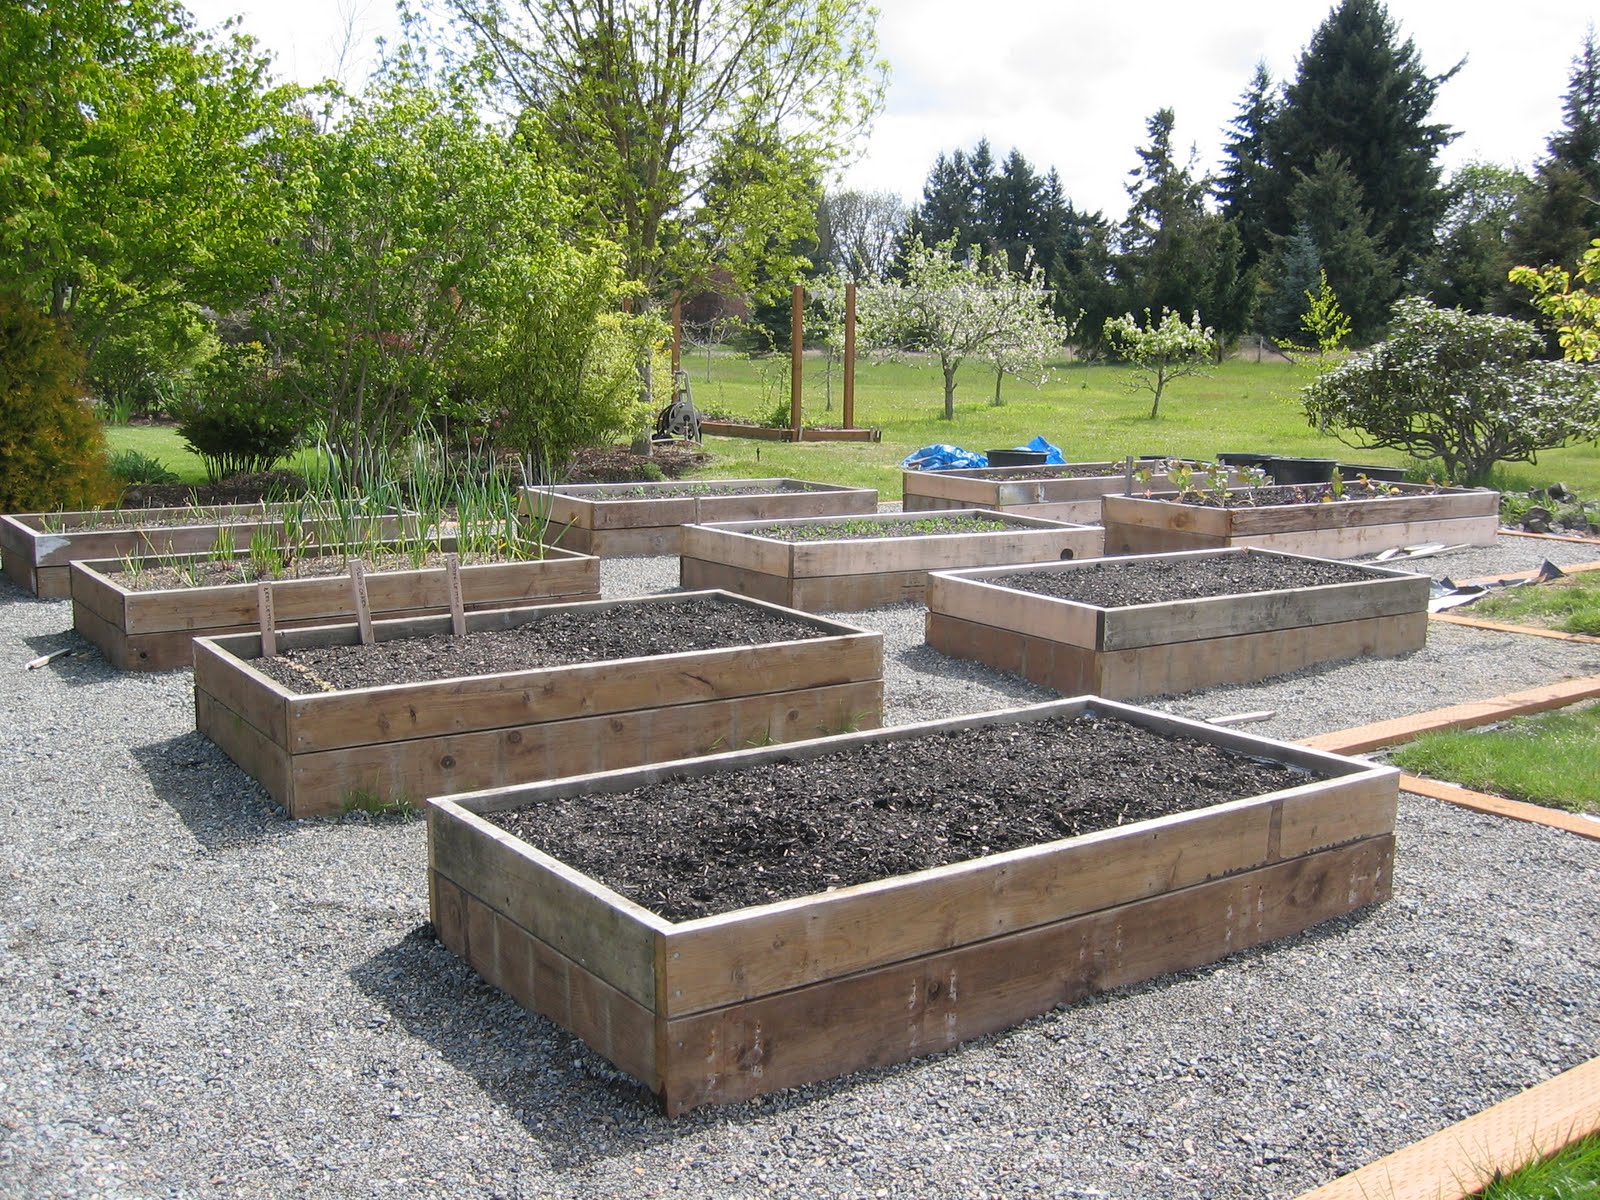 The Tacoma Kitchen Garden Journal: May 2010